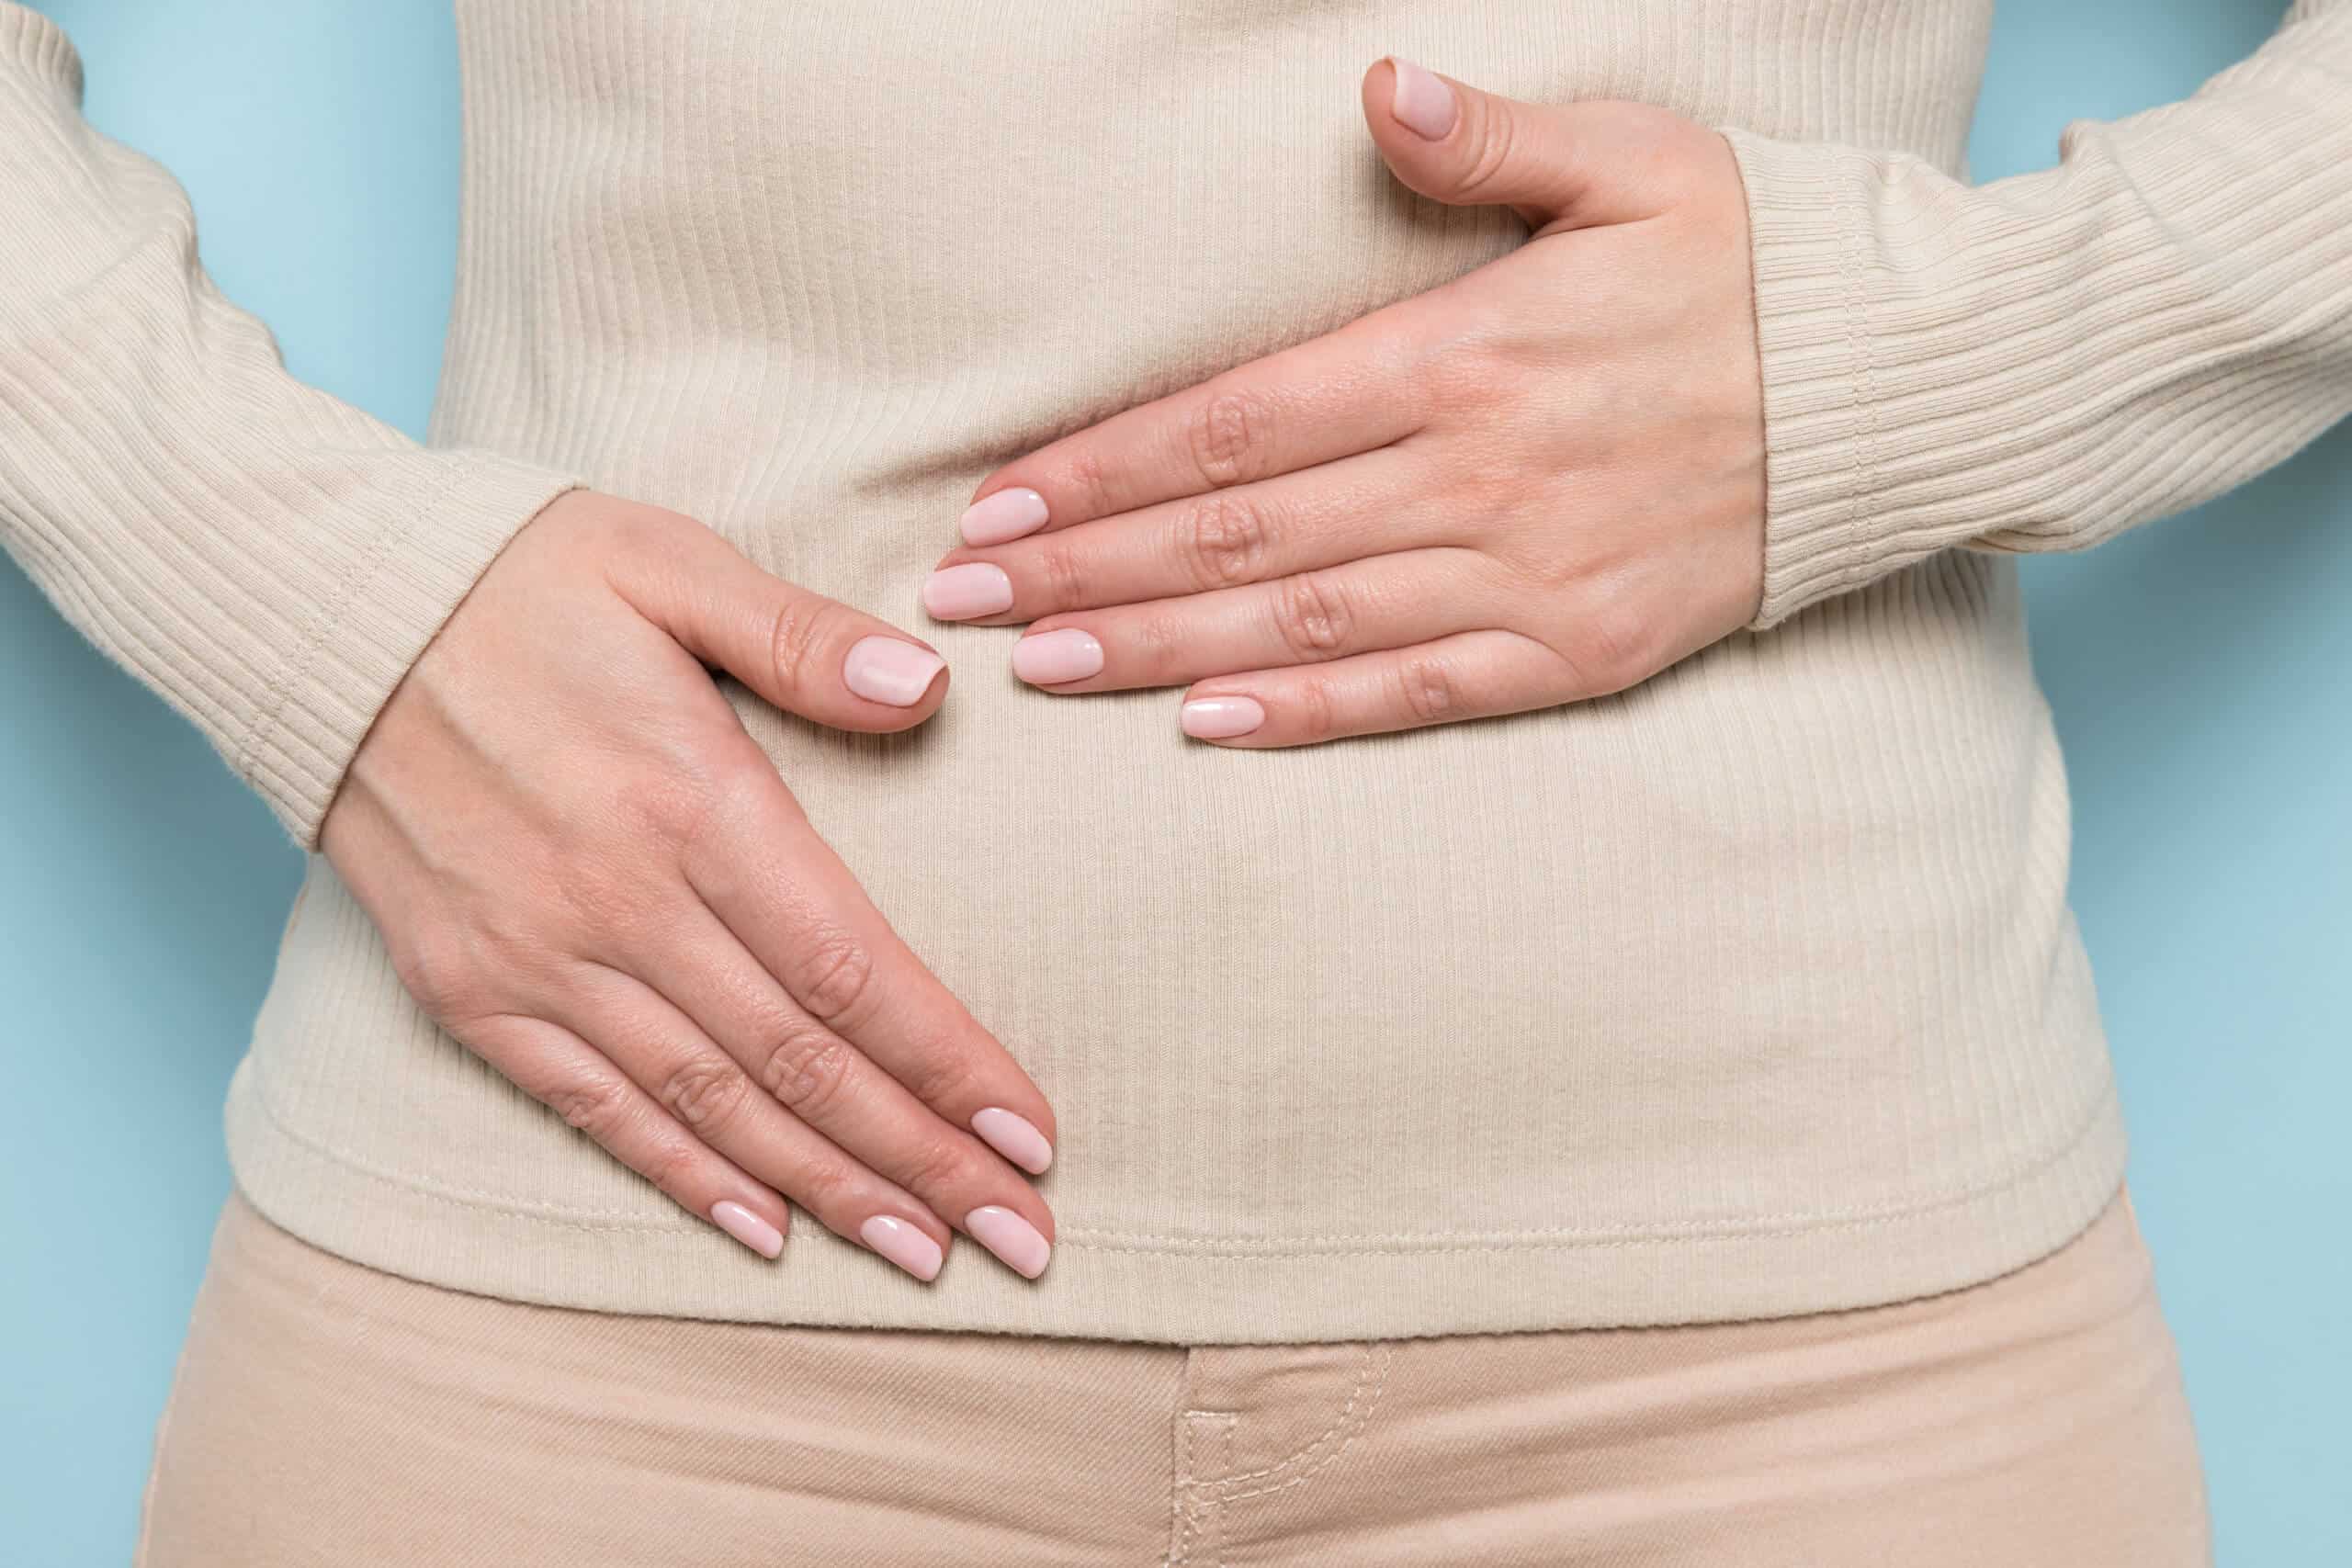 PCOS & Bloating: Why does it happen and how manage it - Fertility